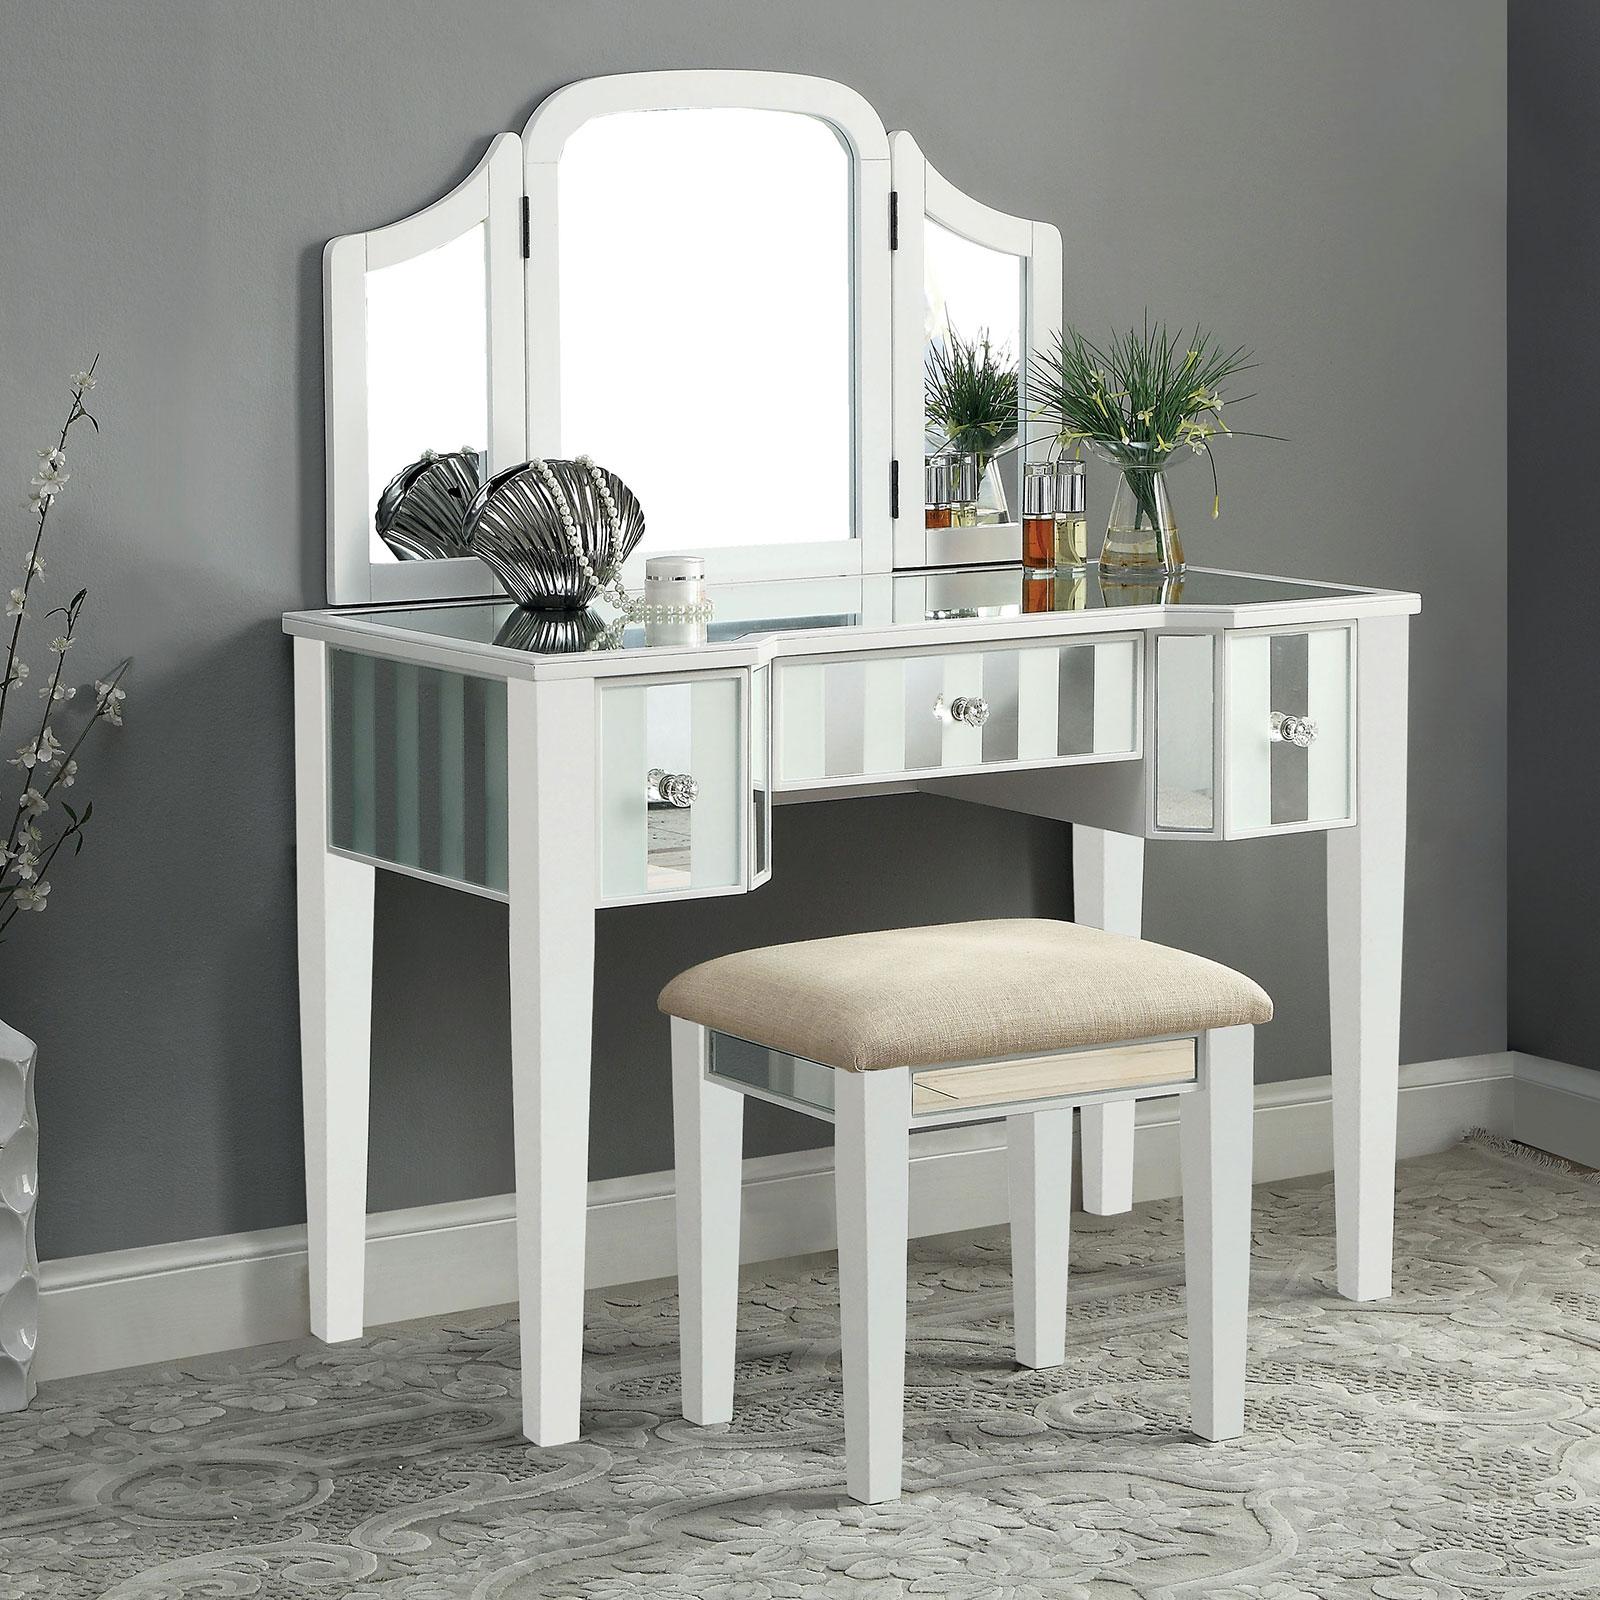 Contemporary Makeup Vanity CYNDI CM-DK6361WH CM-DK6361WH-UPS3 in White 